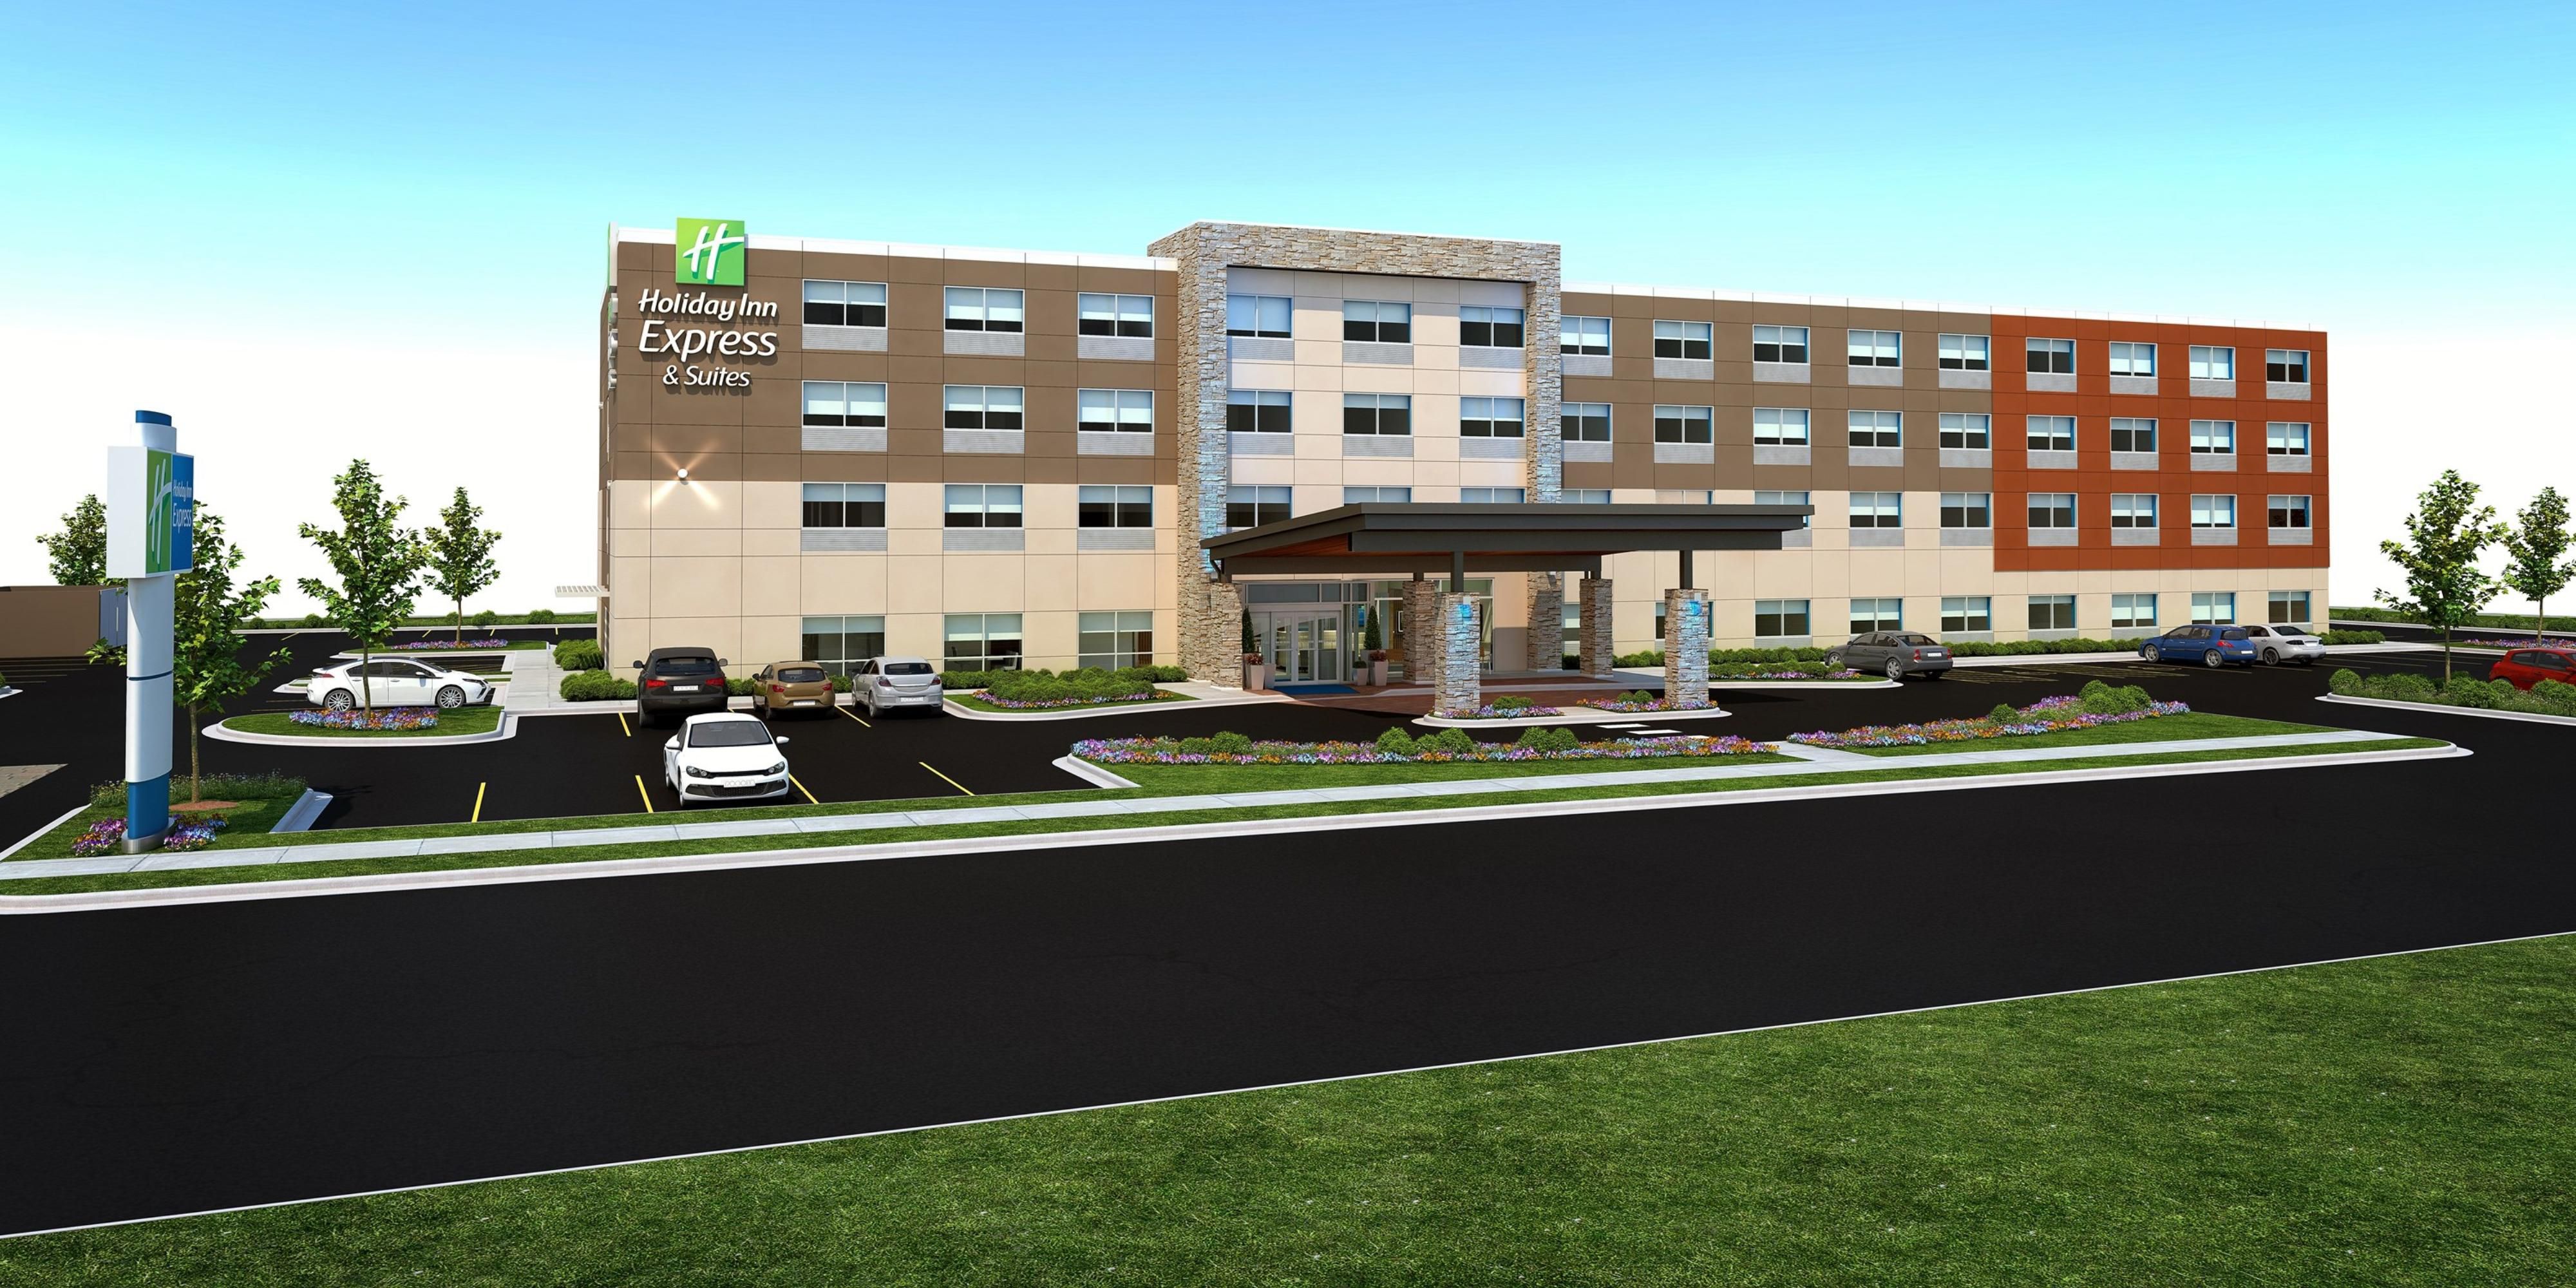 Photo of Holiday Inn Express & Suites Tampa North - Wesley Chapel, Wesley Chapel, FL